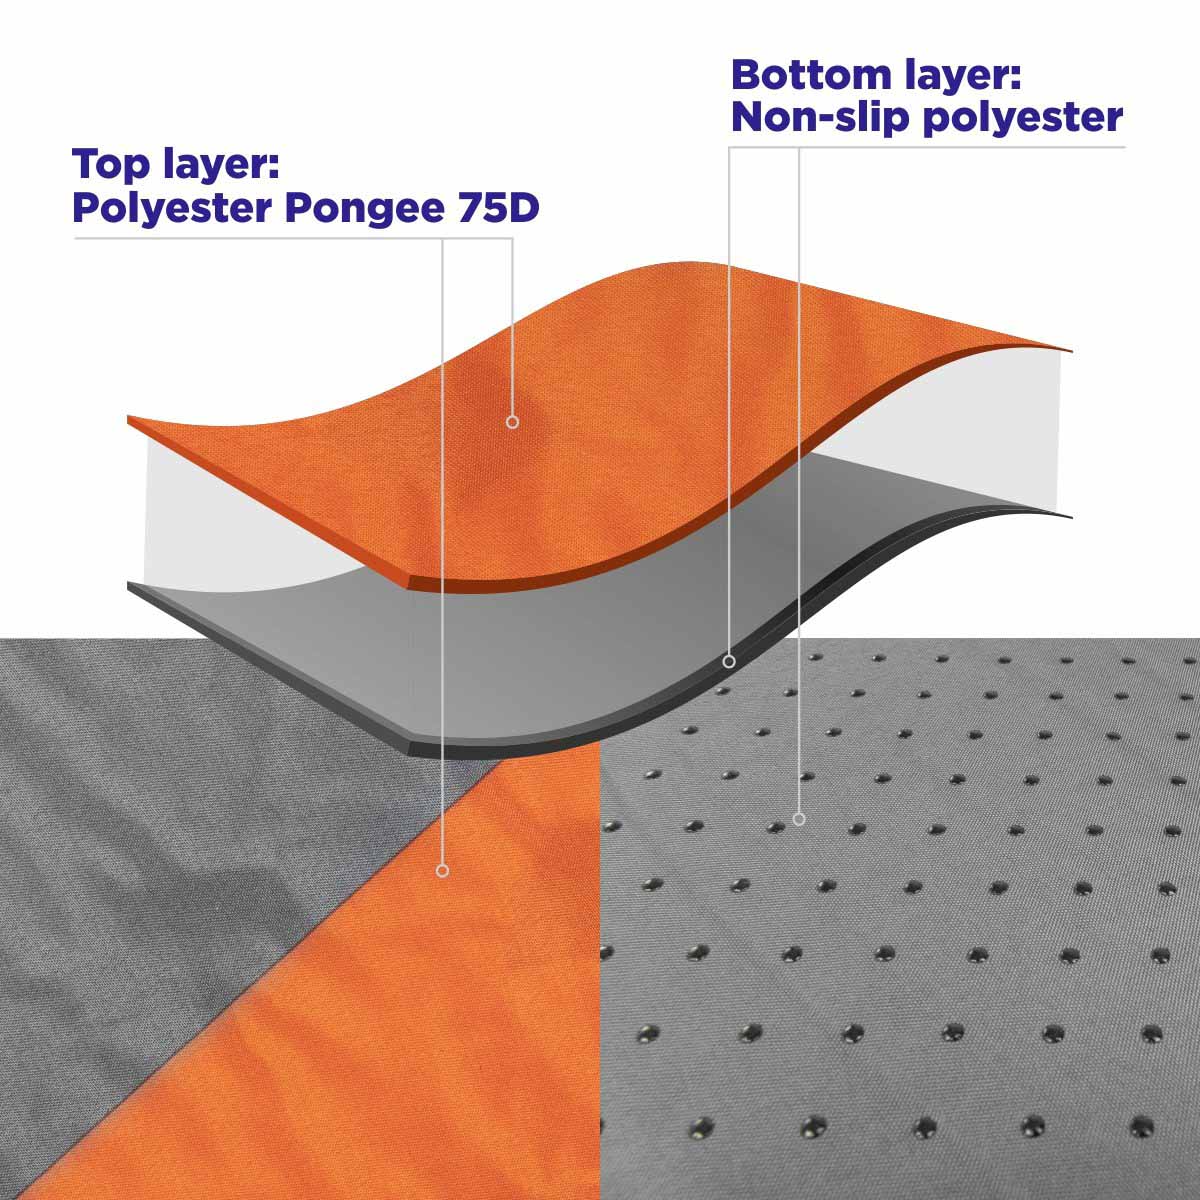 Orange Self Inflating Sleeping Pad made of Polyester Pongee 75D and Non-Slip Polyester